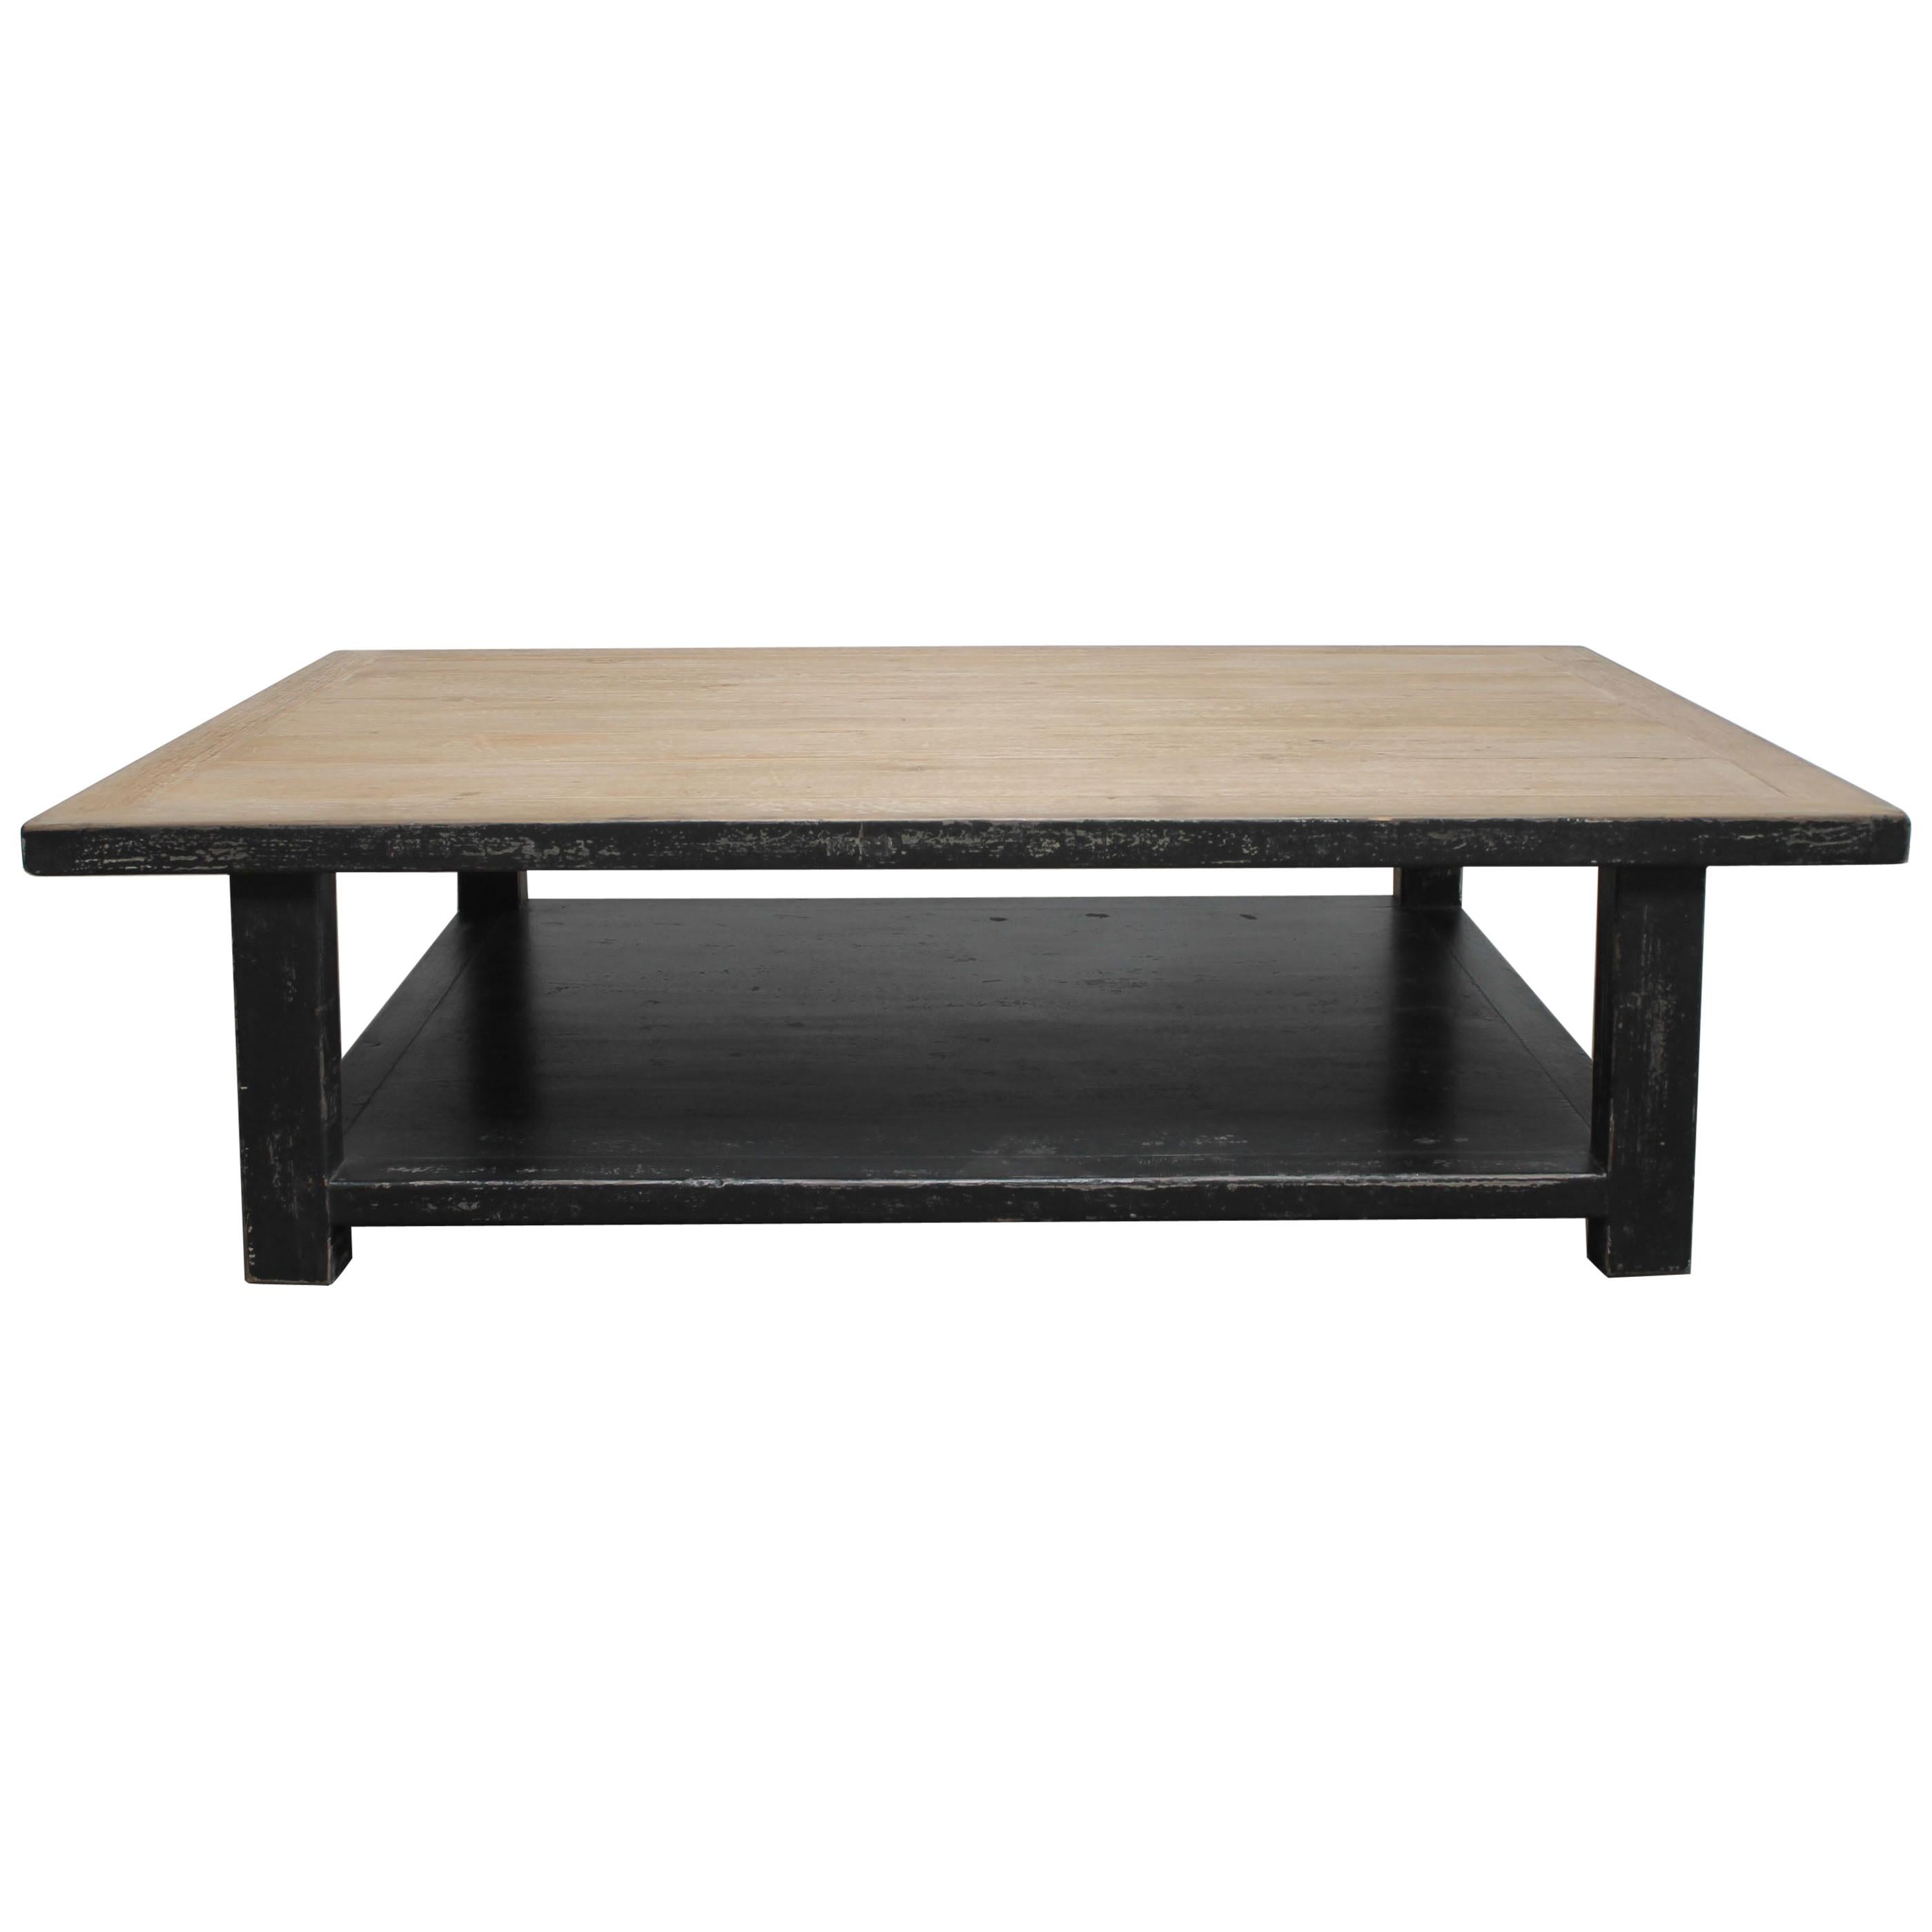 Furniture To Go Small Coffee Table Dark Stained Pine